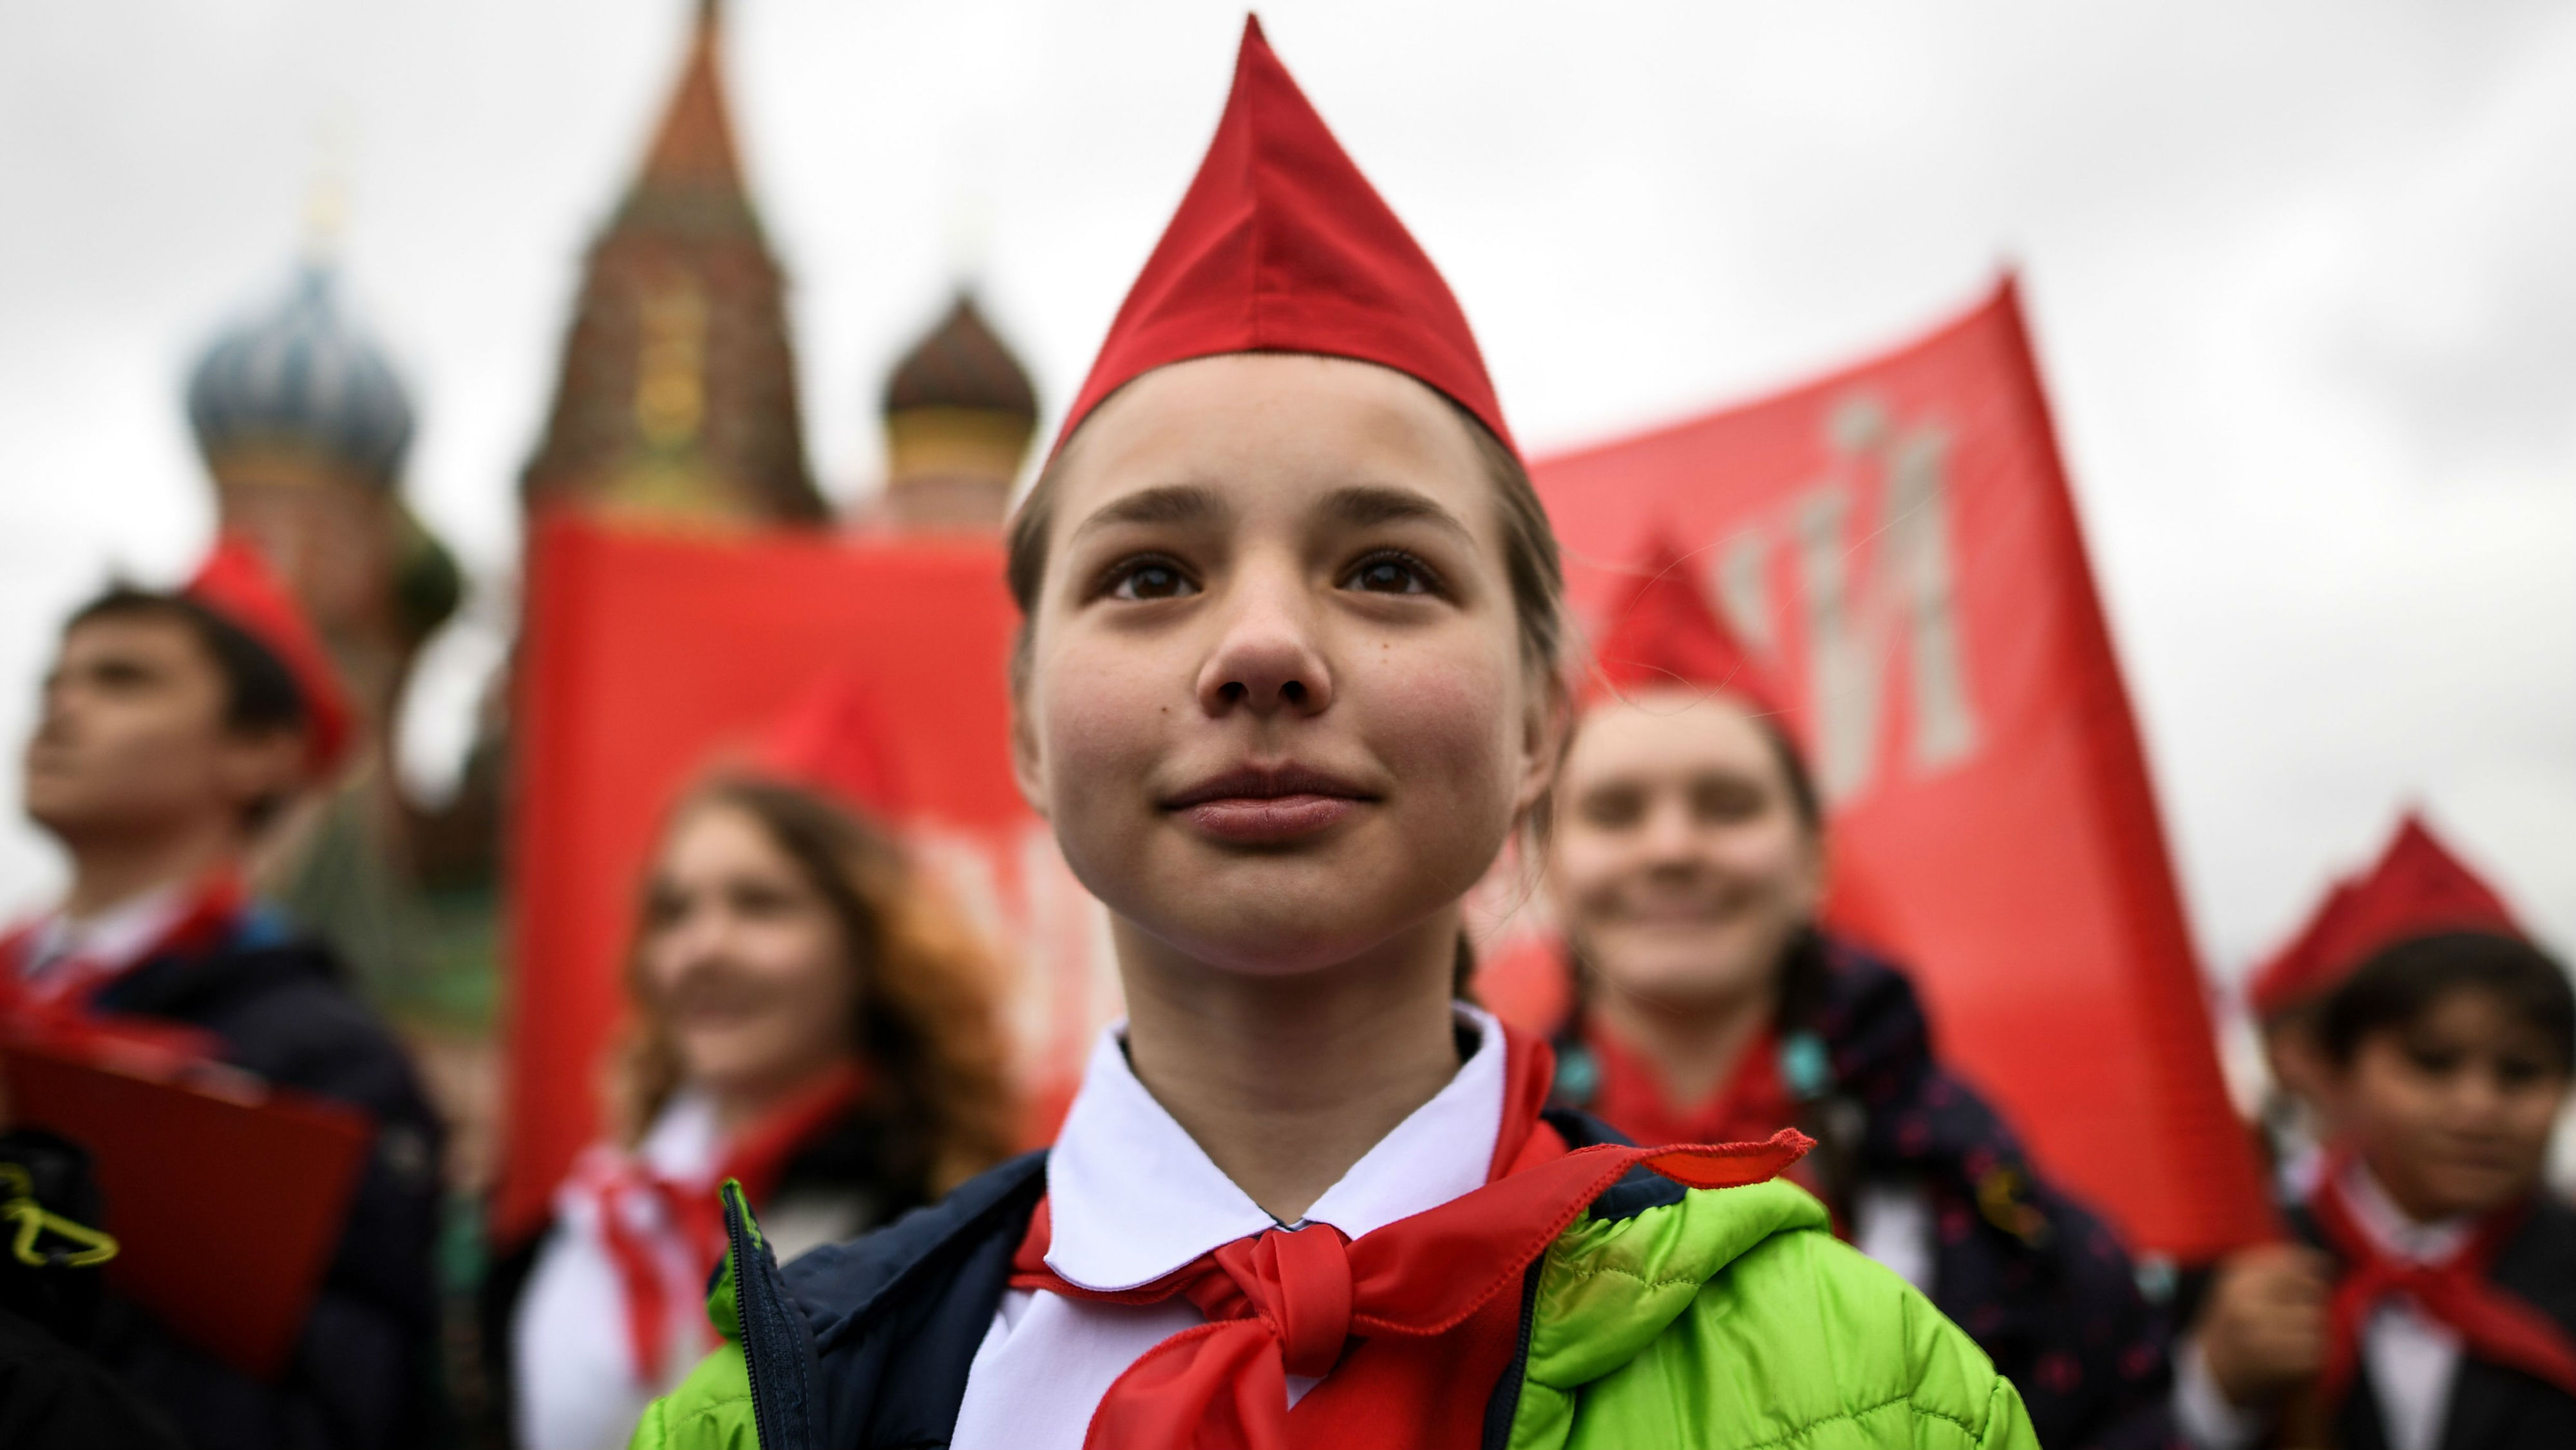 Russian youth communist party initiation 